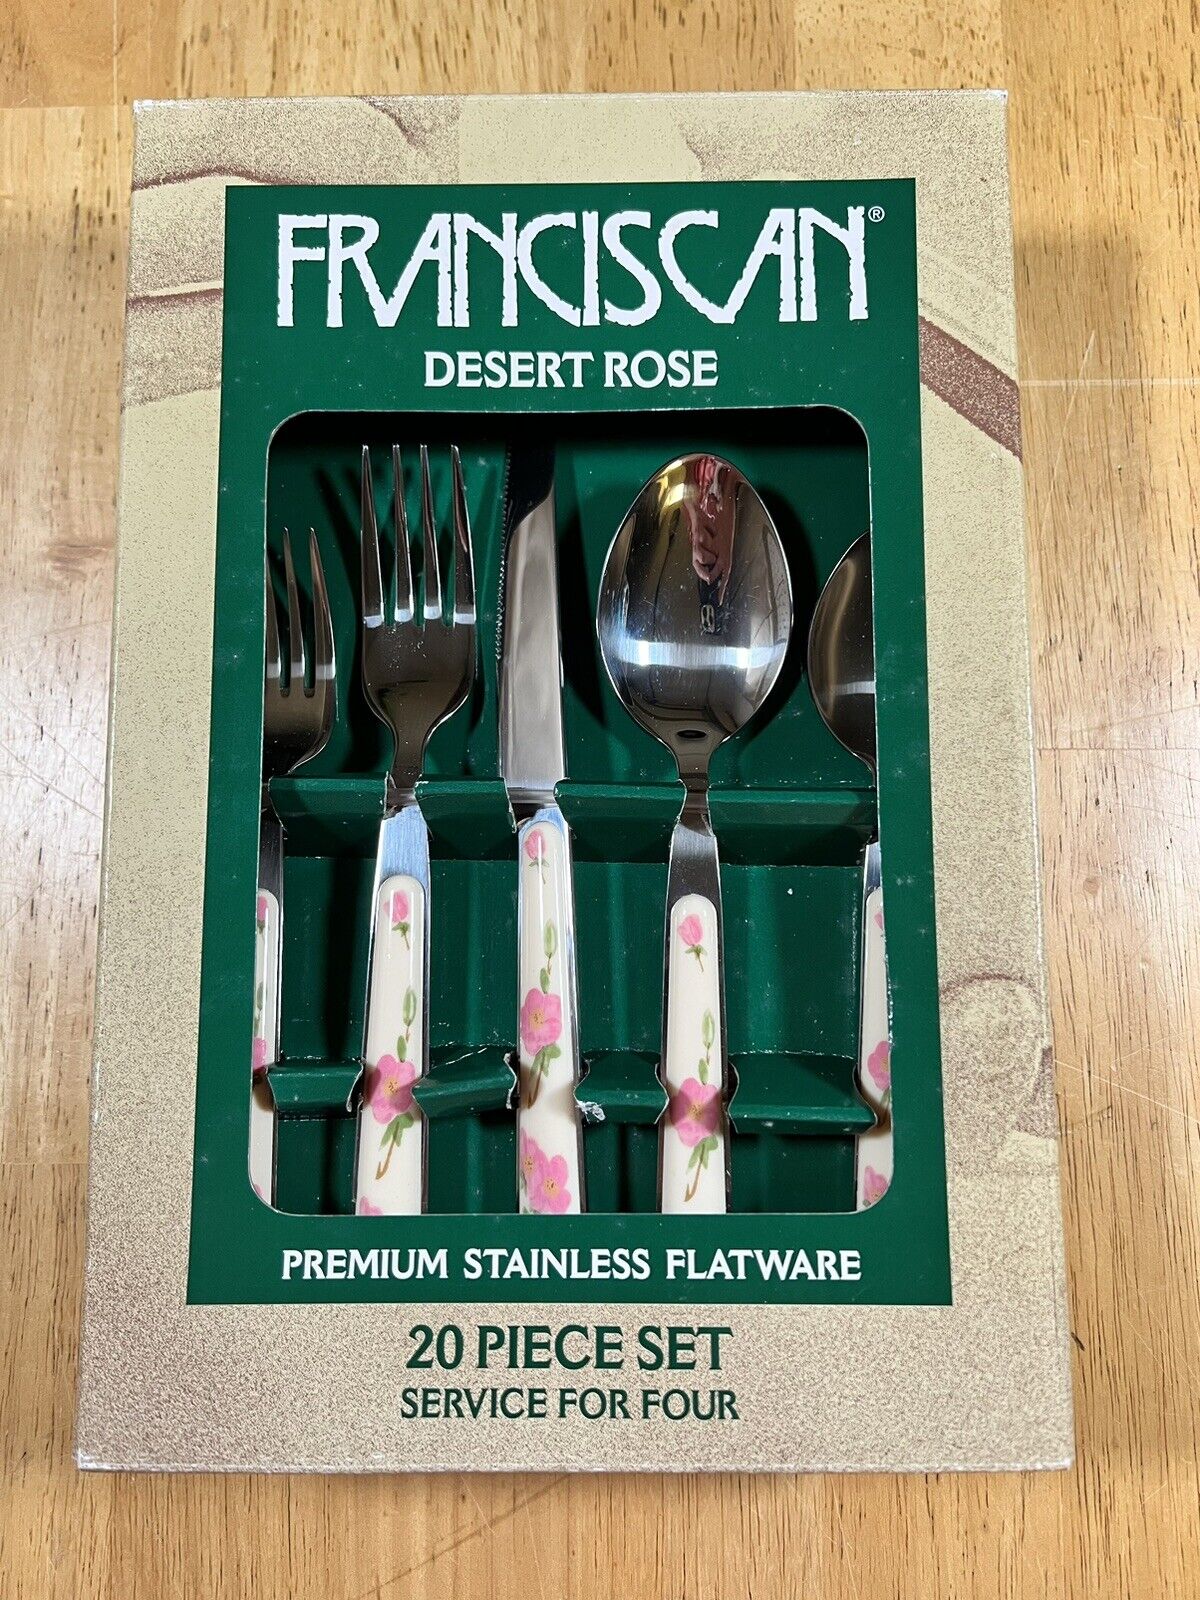 NEW Franciscan Desert Rose Flatware 20-Piece Set Service for 4 NOS New in Box